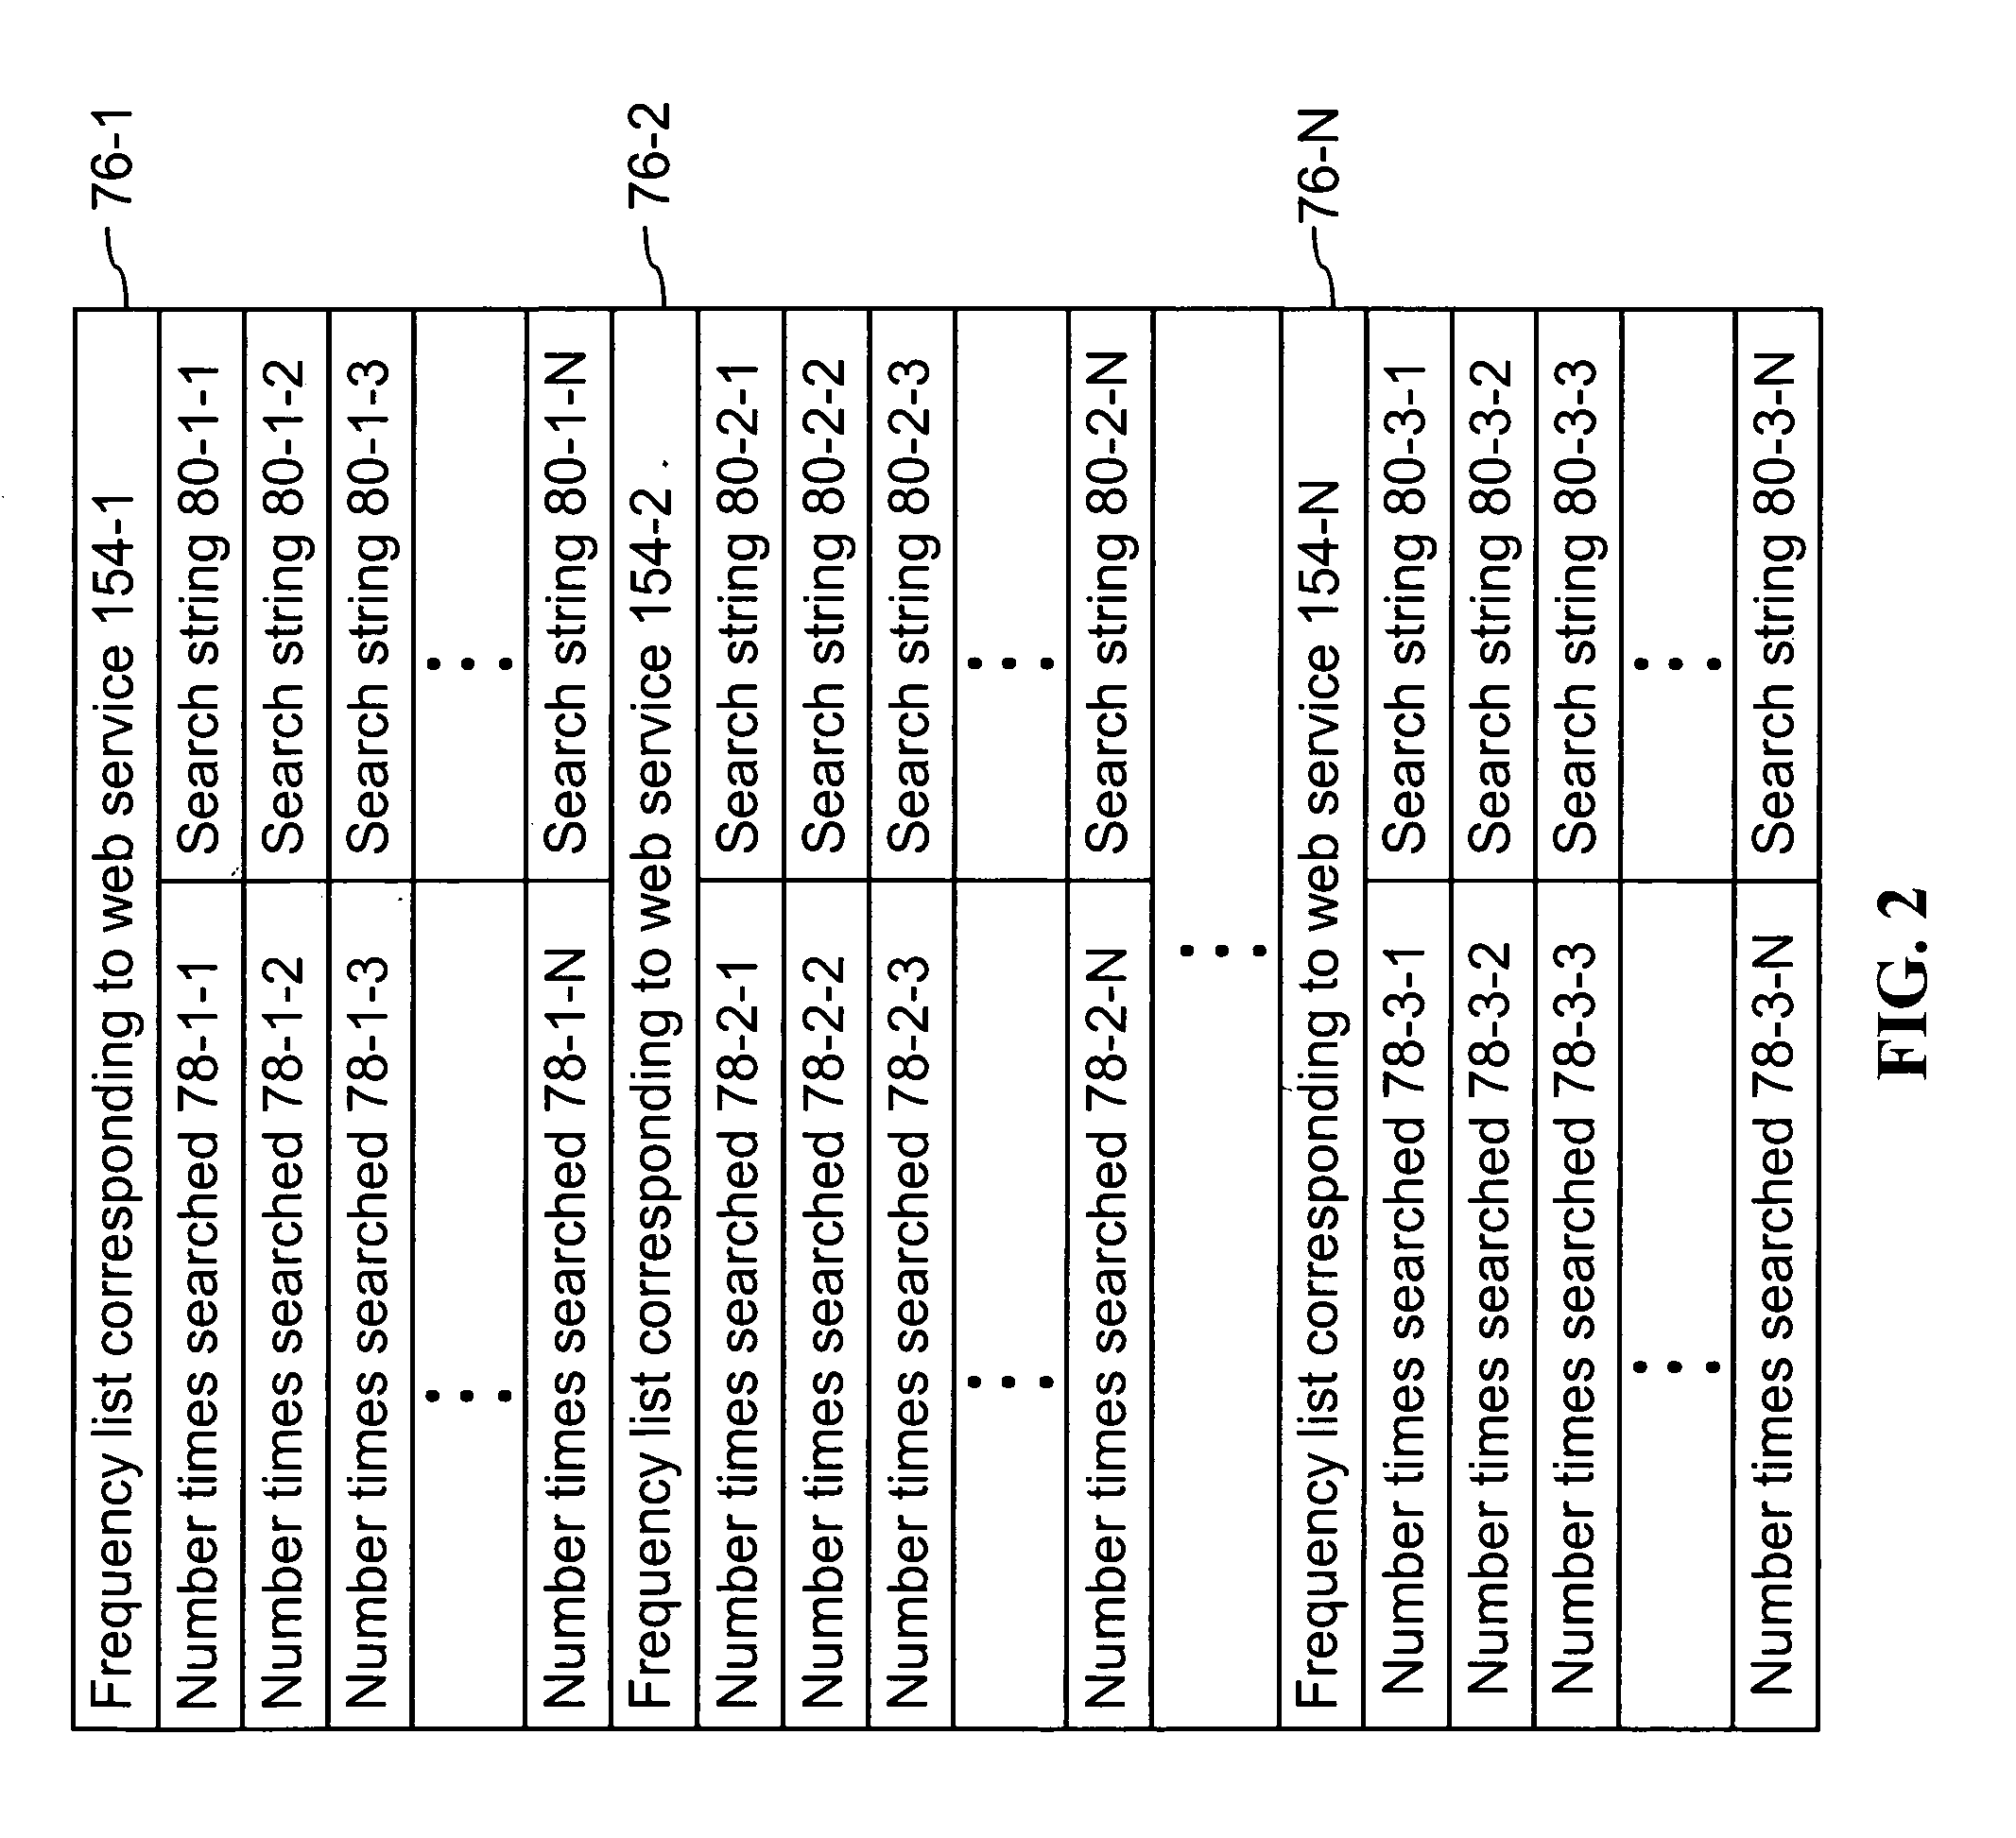 Apparatus and method for delivering information over a network